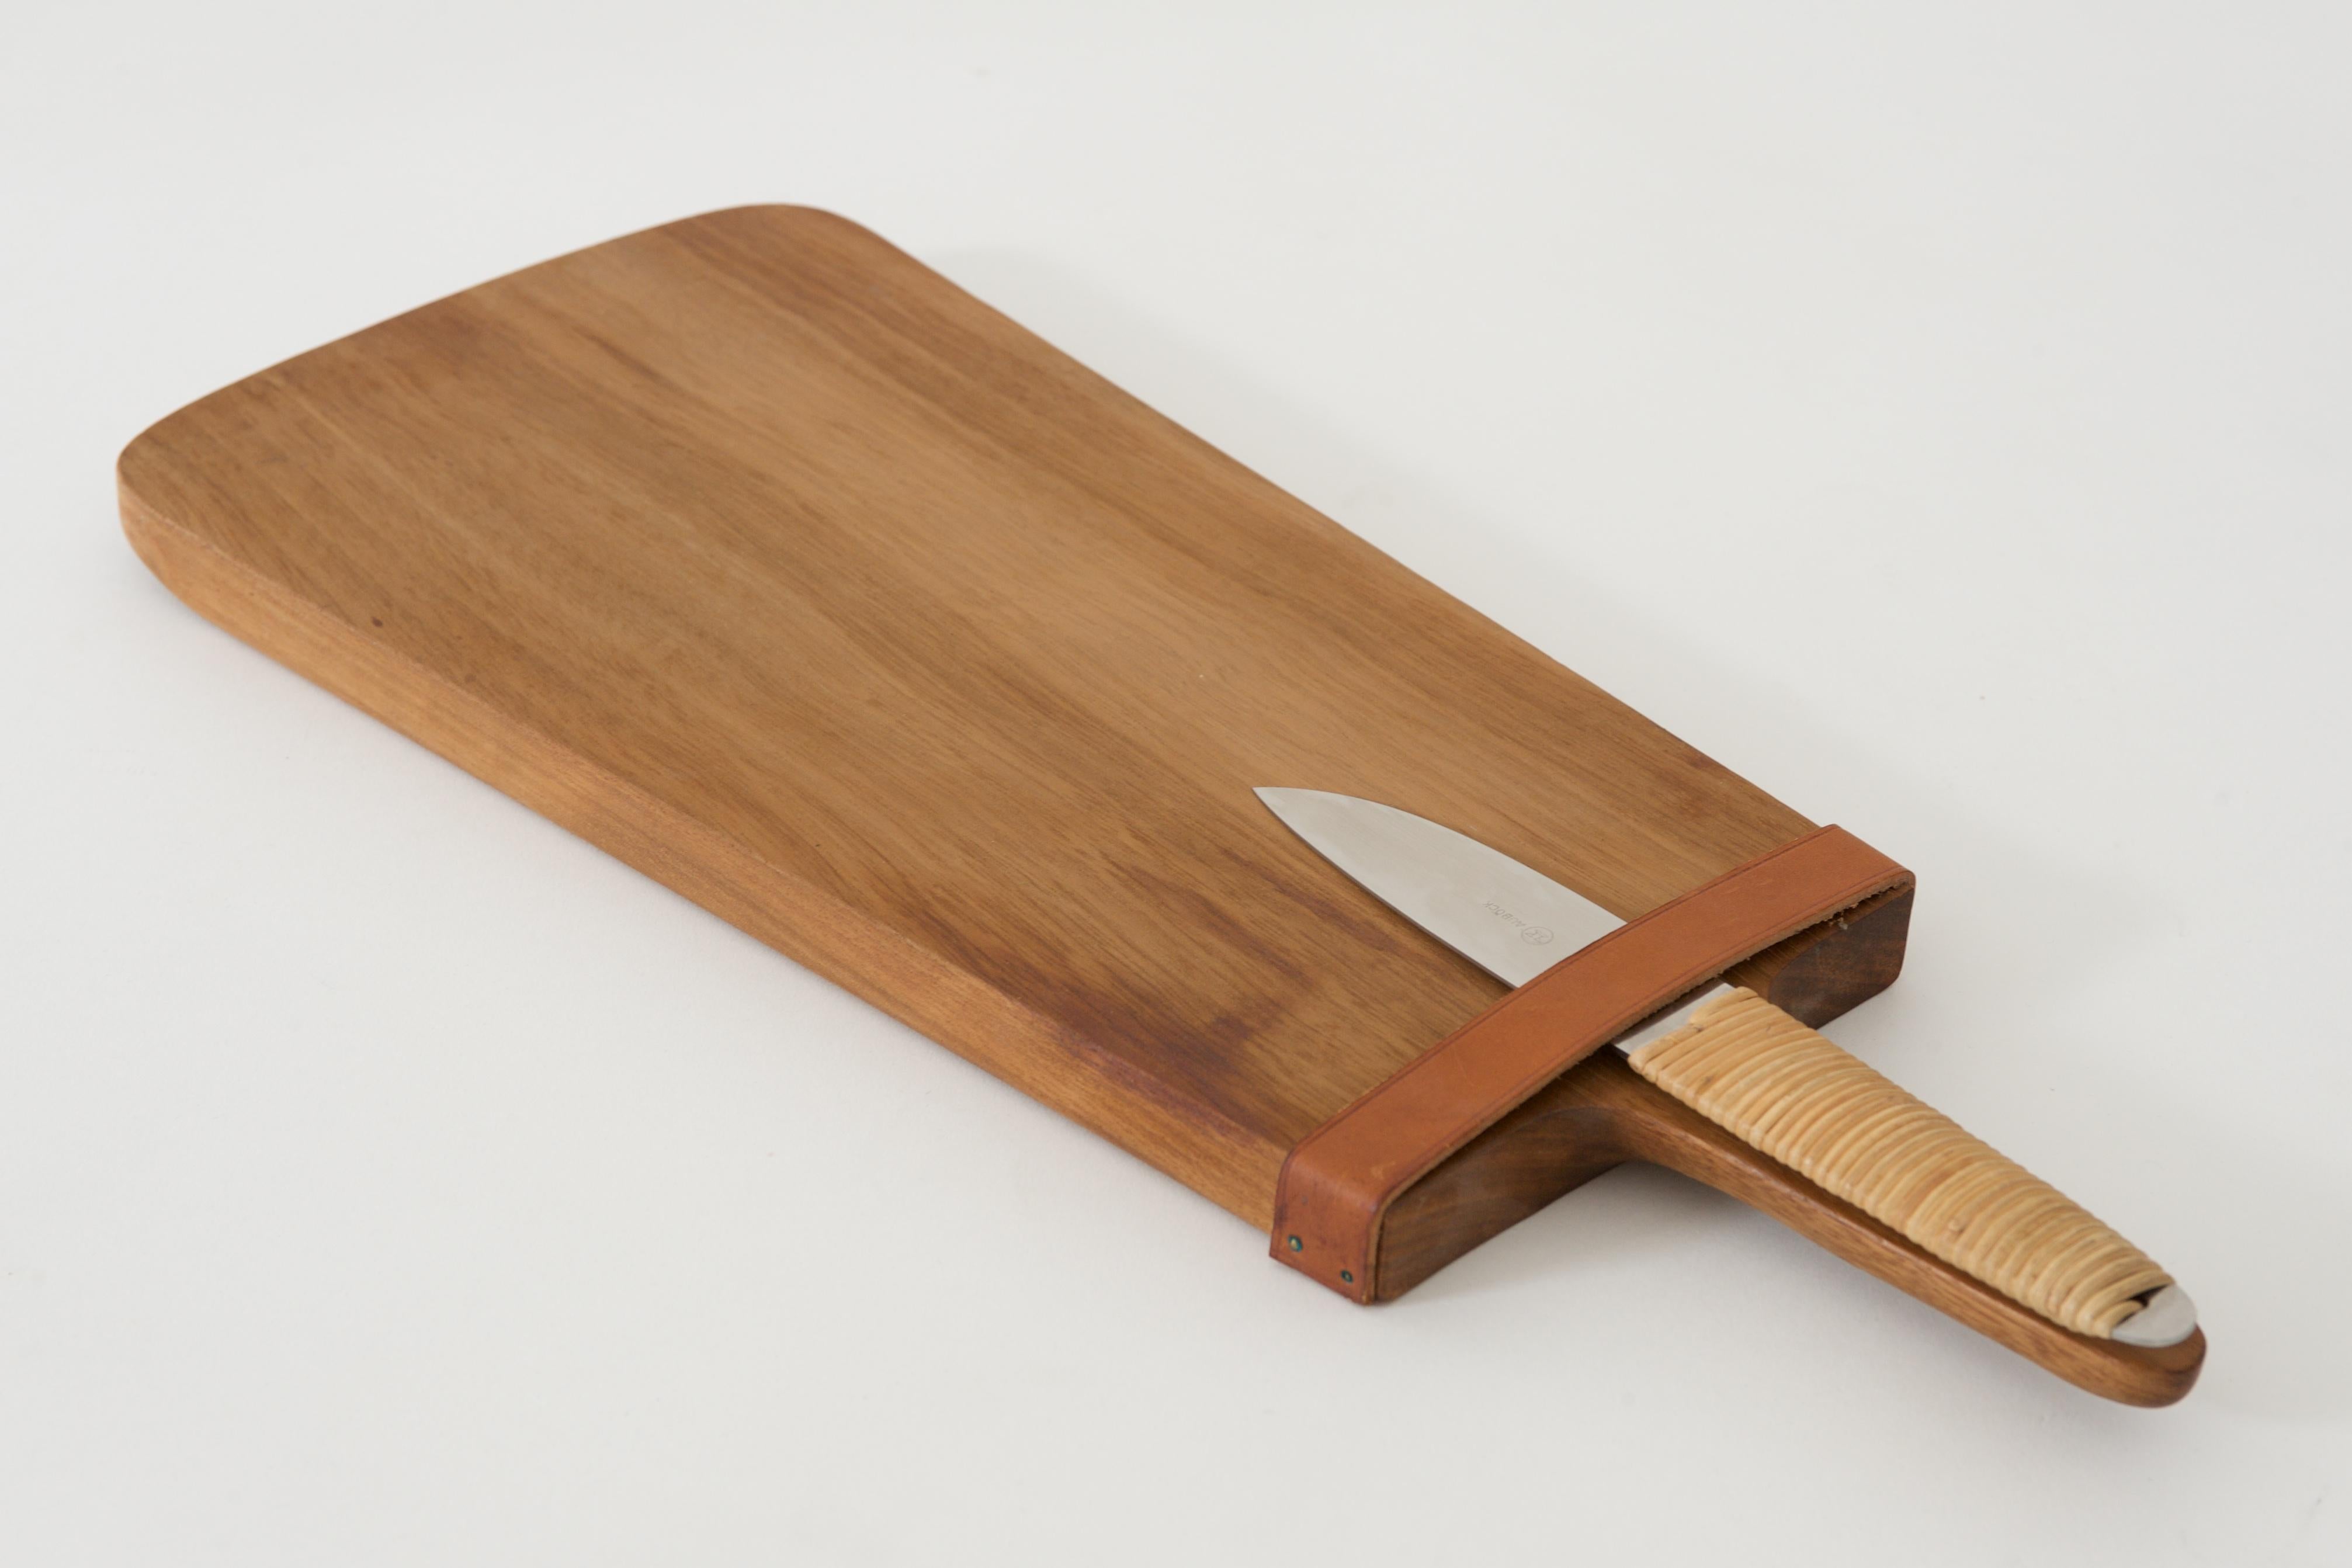 Chopping board with a Knife
Designed by Carl Auböck, 1950s

Nutwood, leather, stainless steel, raffia
Knife marked with AUBÖCK, Amboss Logo, Stainless, Austria

Measure: D 19.6, W 48 cm, H 2.2 cm / D 7.71 in, 18.89 in, 0.87 in
Knife: L 22.00